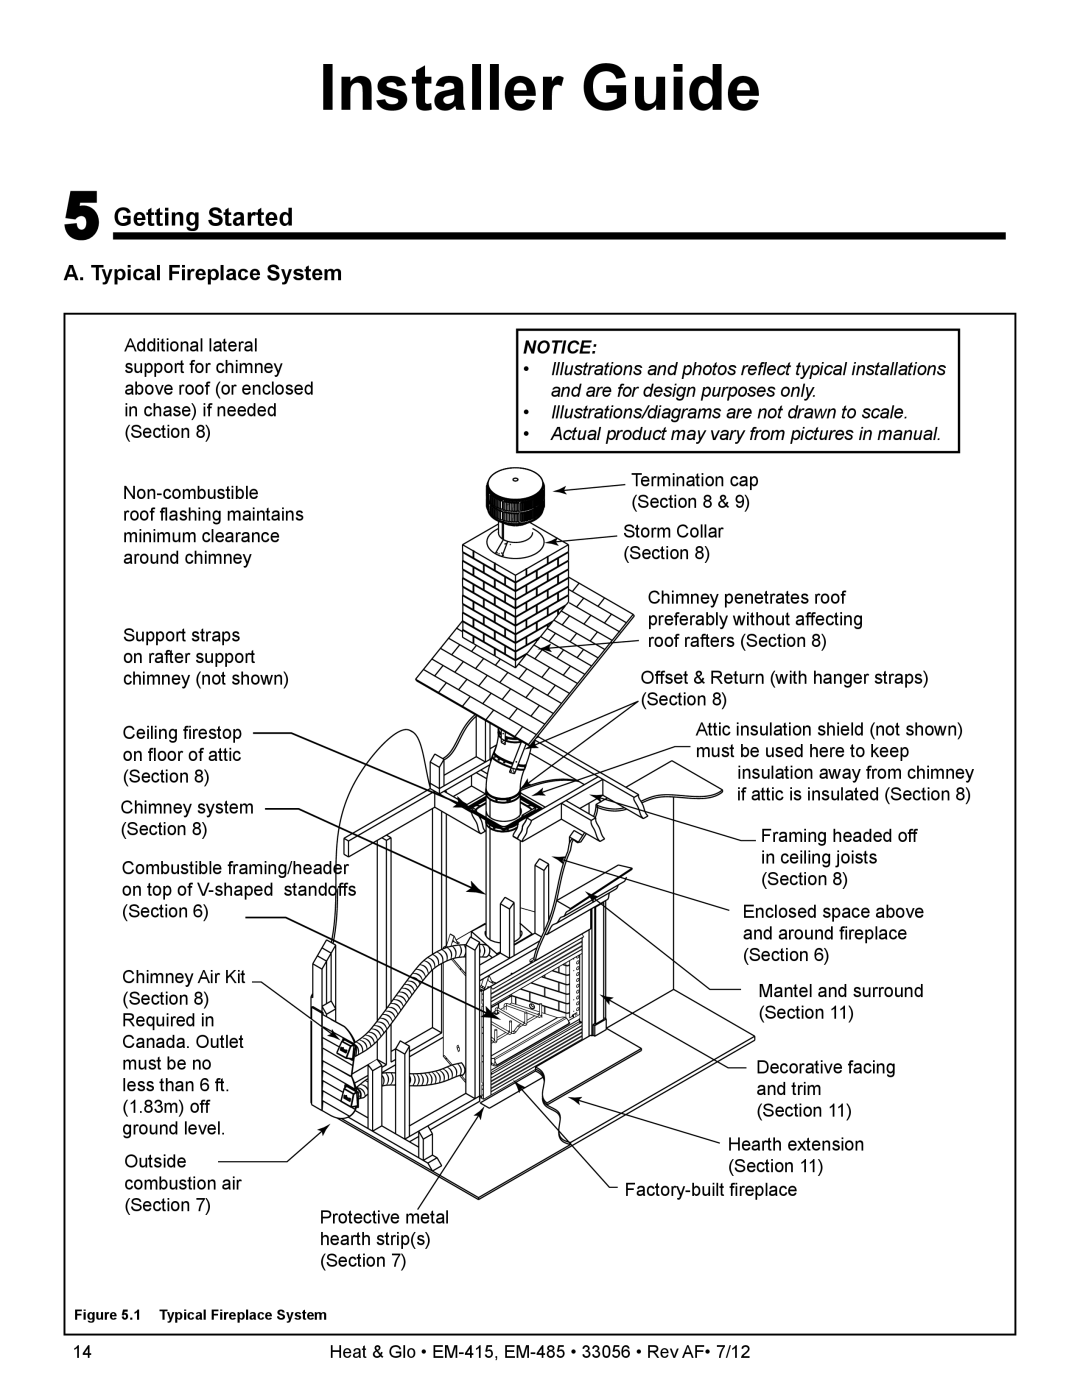 Heat & Glo LifeStyle EM-415 - 36, EM-485T - 42 Installer Guide, 5Getting Started, A. Typical Fireplace System, Notice 